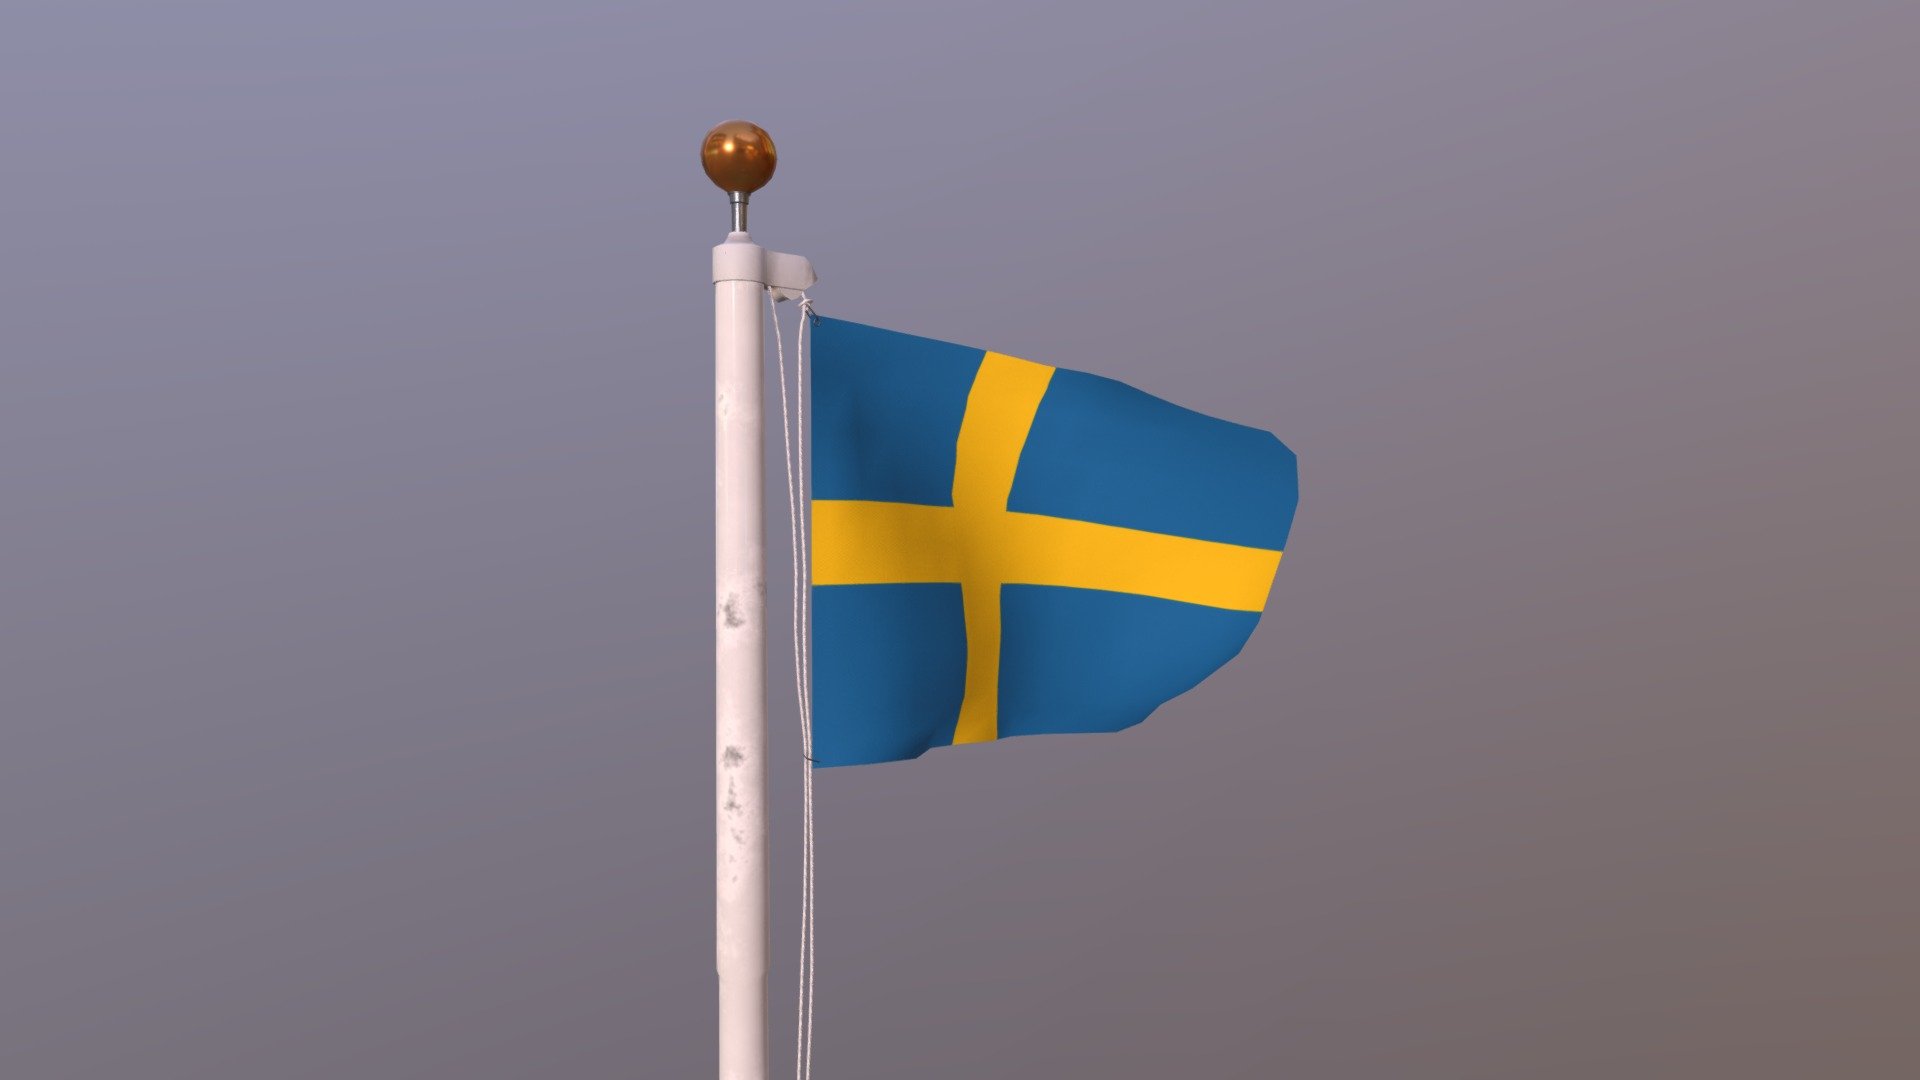 Flag of Sweden (waving in the wind) / Sveriges flagga (viftar i vinden)

A low poly 3D model of an animated and rigged flag. The low poly flag was modeled and prepared for low-poly style renderings, general visualization, background.

UV Layout maps and Image Textures resolutions: 1024x1024 px; PBR Textures created and baked (SimpleBake) in Blender and included diffuse, roughness, metalness and normal maps. 
The entourage is separate object, 2D girl for visual scale (175 cm) plus terrain, and have simple material with colors and it's just for presentation.

The animation has 190 frames.

Details:

real world dimensions




Flag cloth size

-length: 140 cm
-width: 90 cm




Flagpole size

-diameter: 10 cm
-height: 680 cm

v.7 - Flag of Sweden (animated) - 3D model by mihais (@m1hais) 3d model